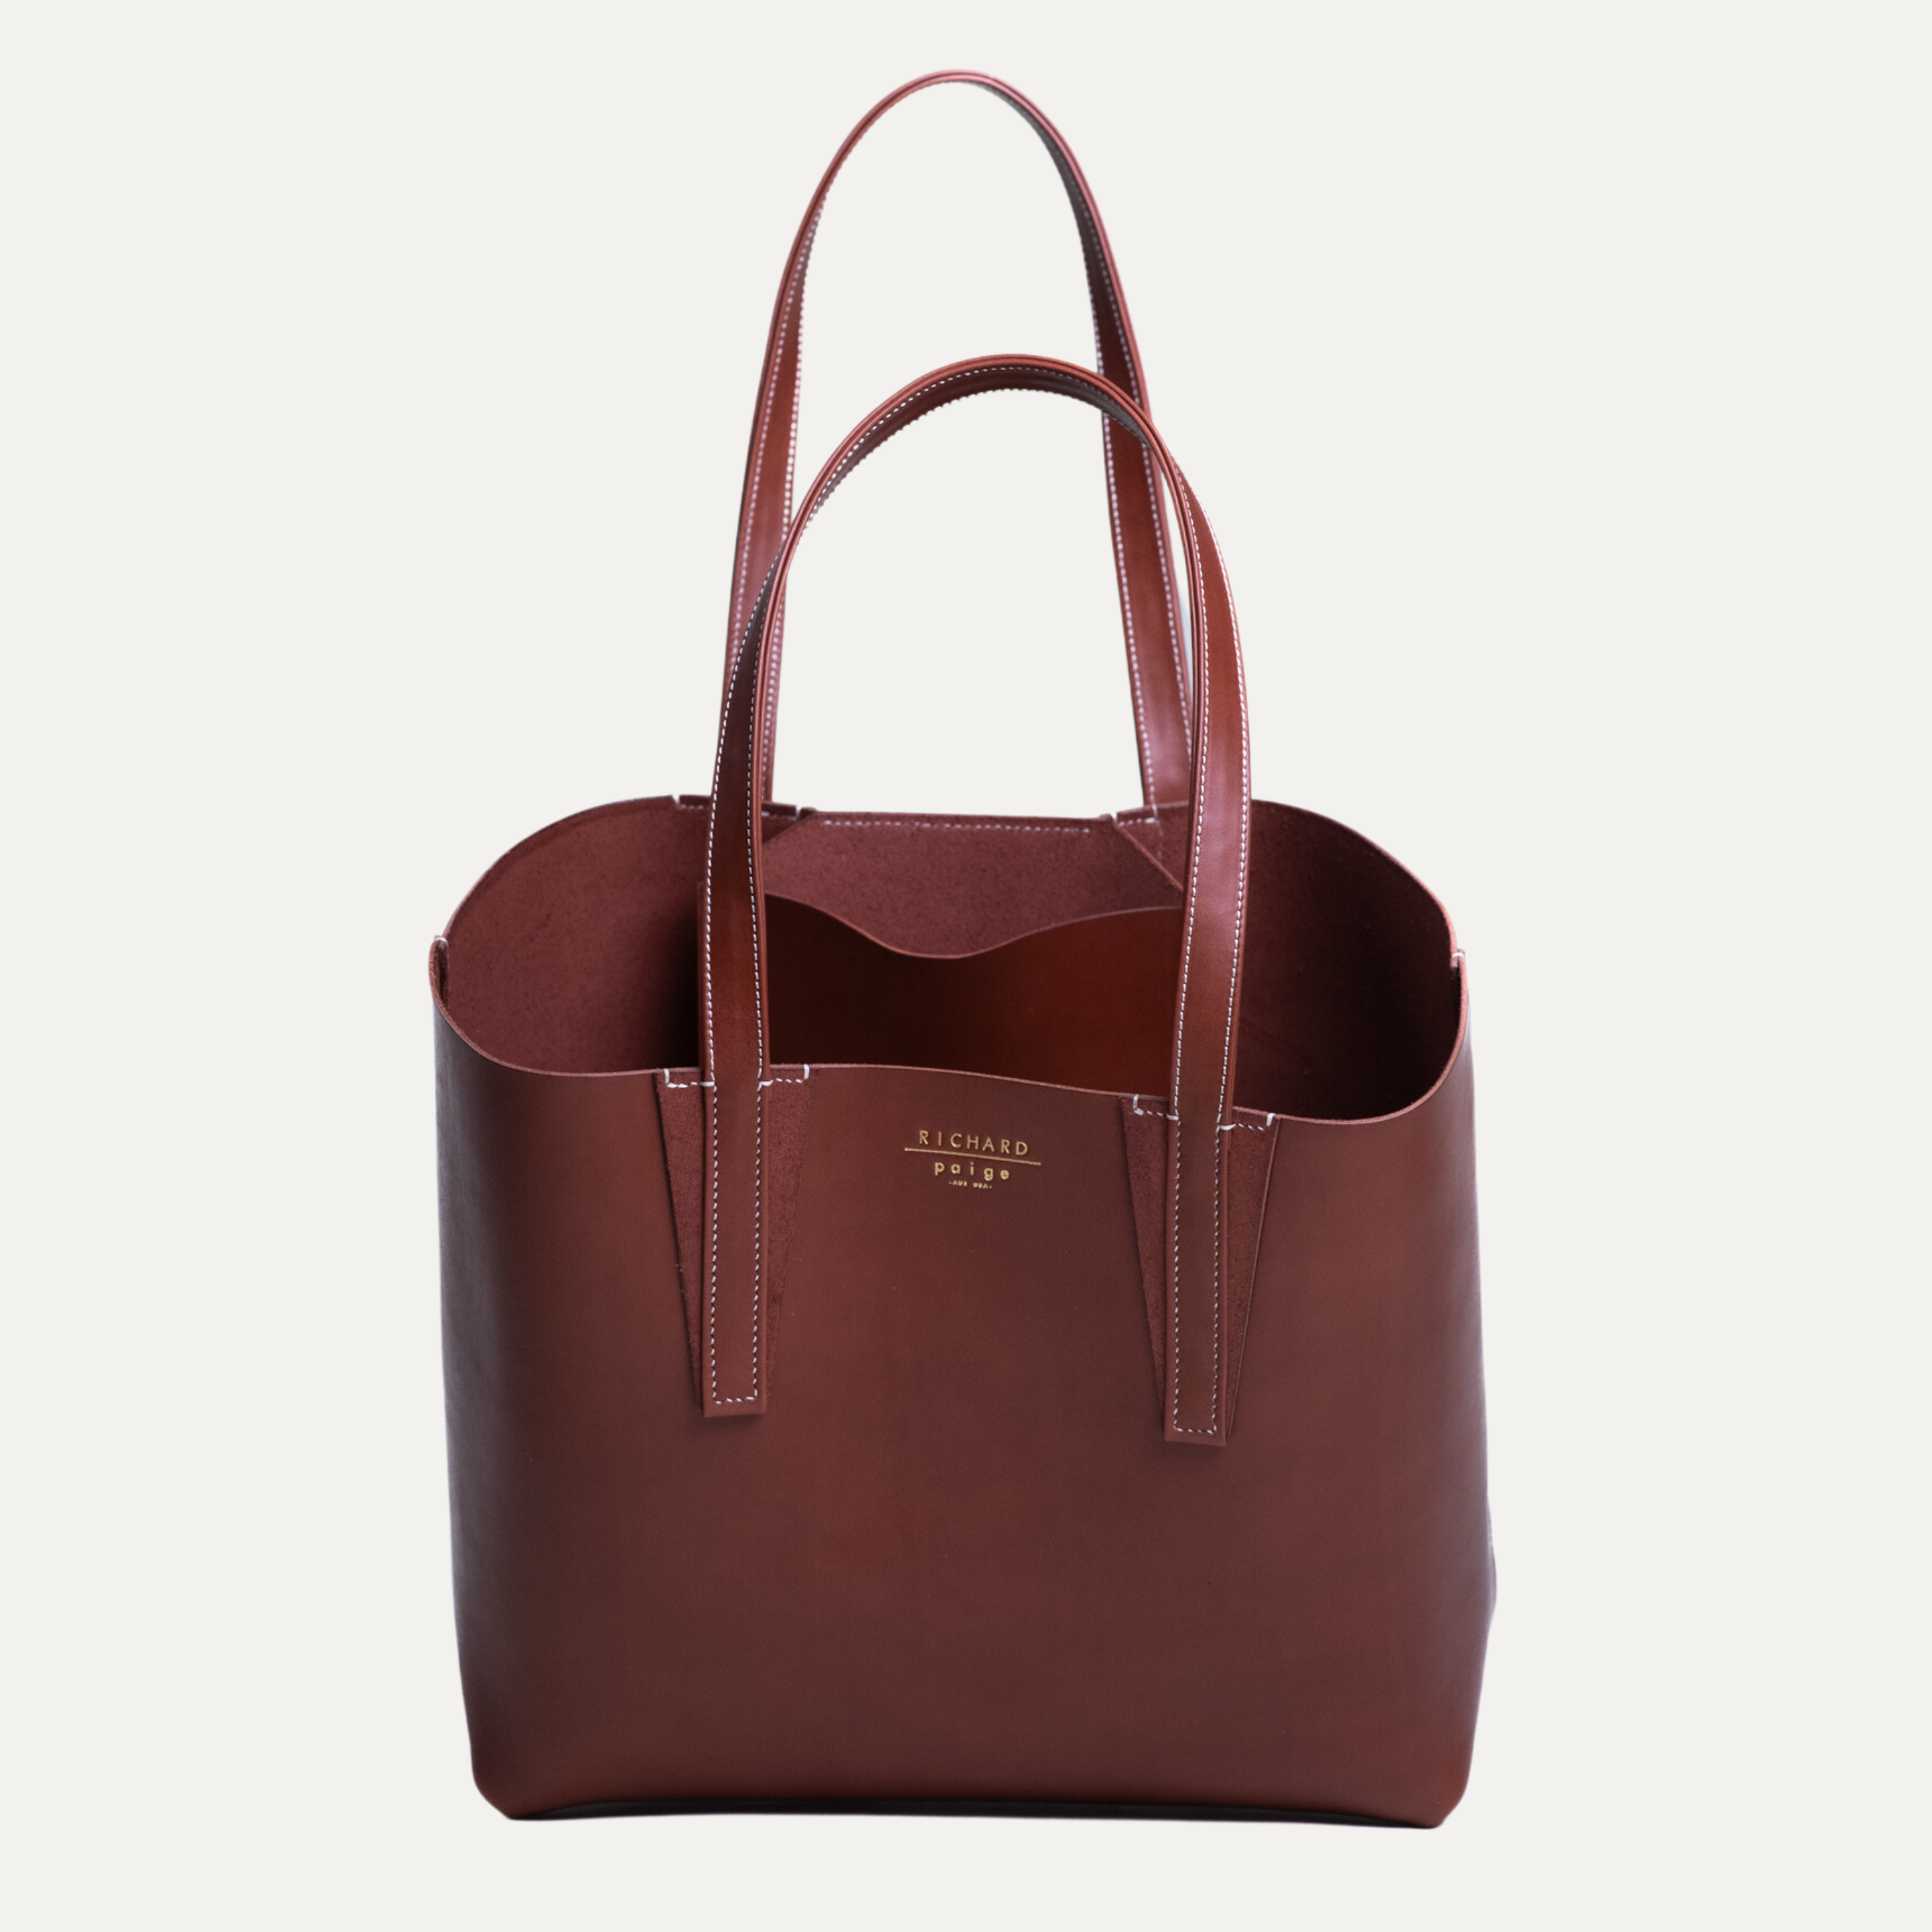 Chestnut Leather Luxury Tote Bag Made in Australia